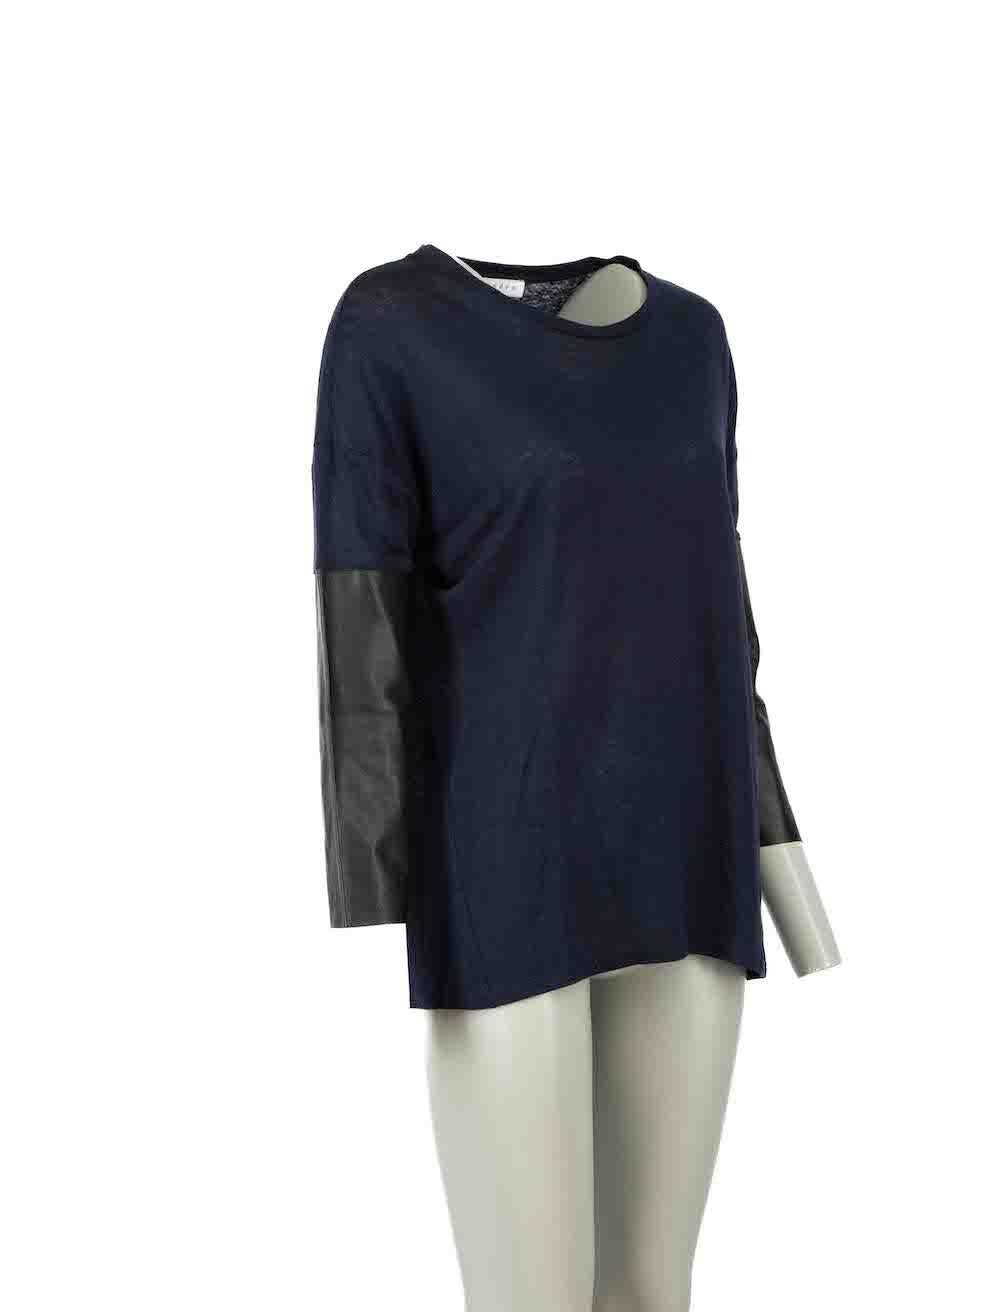 CONDITION is Very good. Hardly any visible wear to jumper is evident on this used Sandro designer resale item.
 
Details
Navy
Linen
Mid sleeves jumper
Round neckline
Slightly sheer 
Stretchy and knitted 
Black leather panel on sleeves
 
Made in